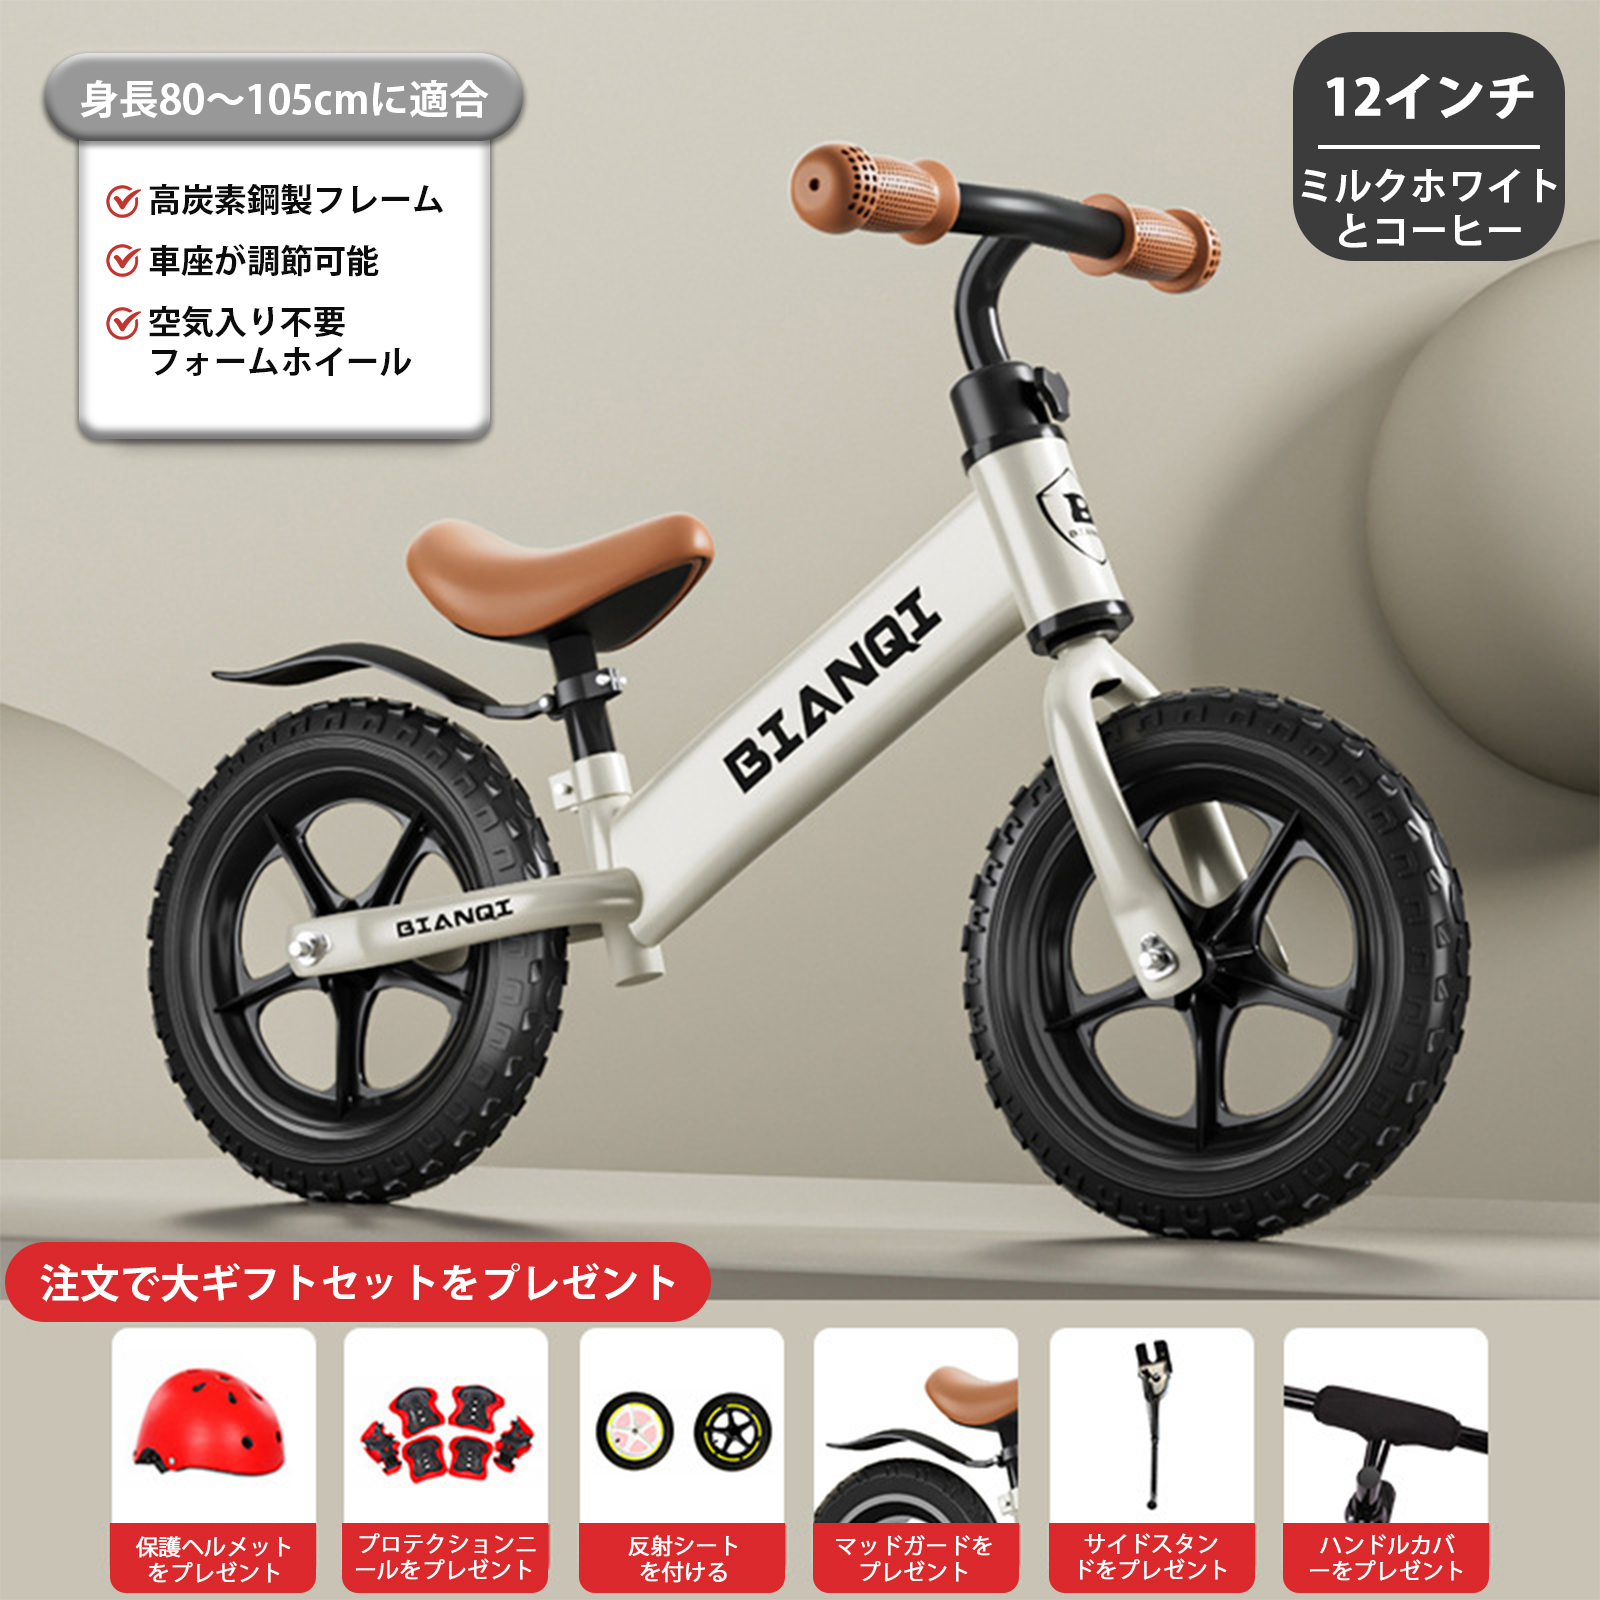 K12 white integrated inflatable wheel